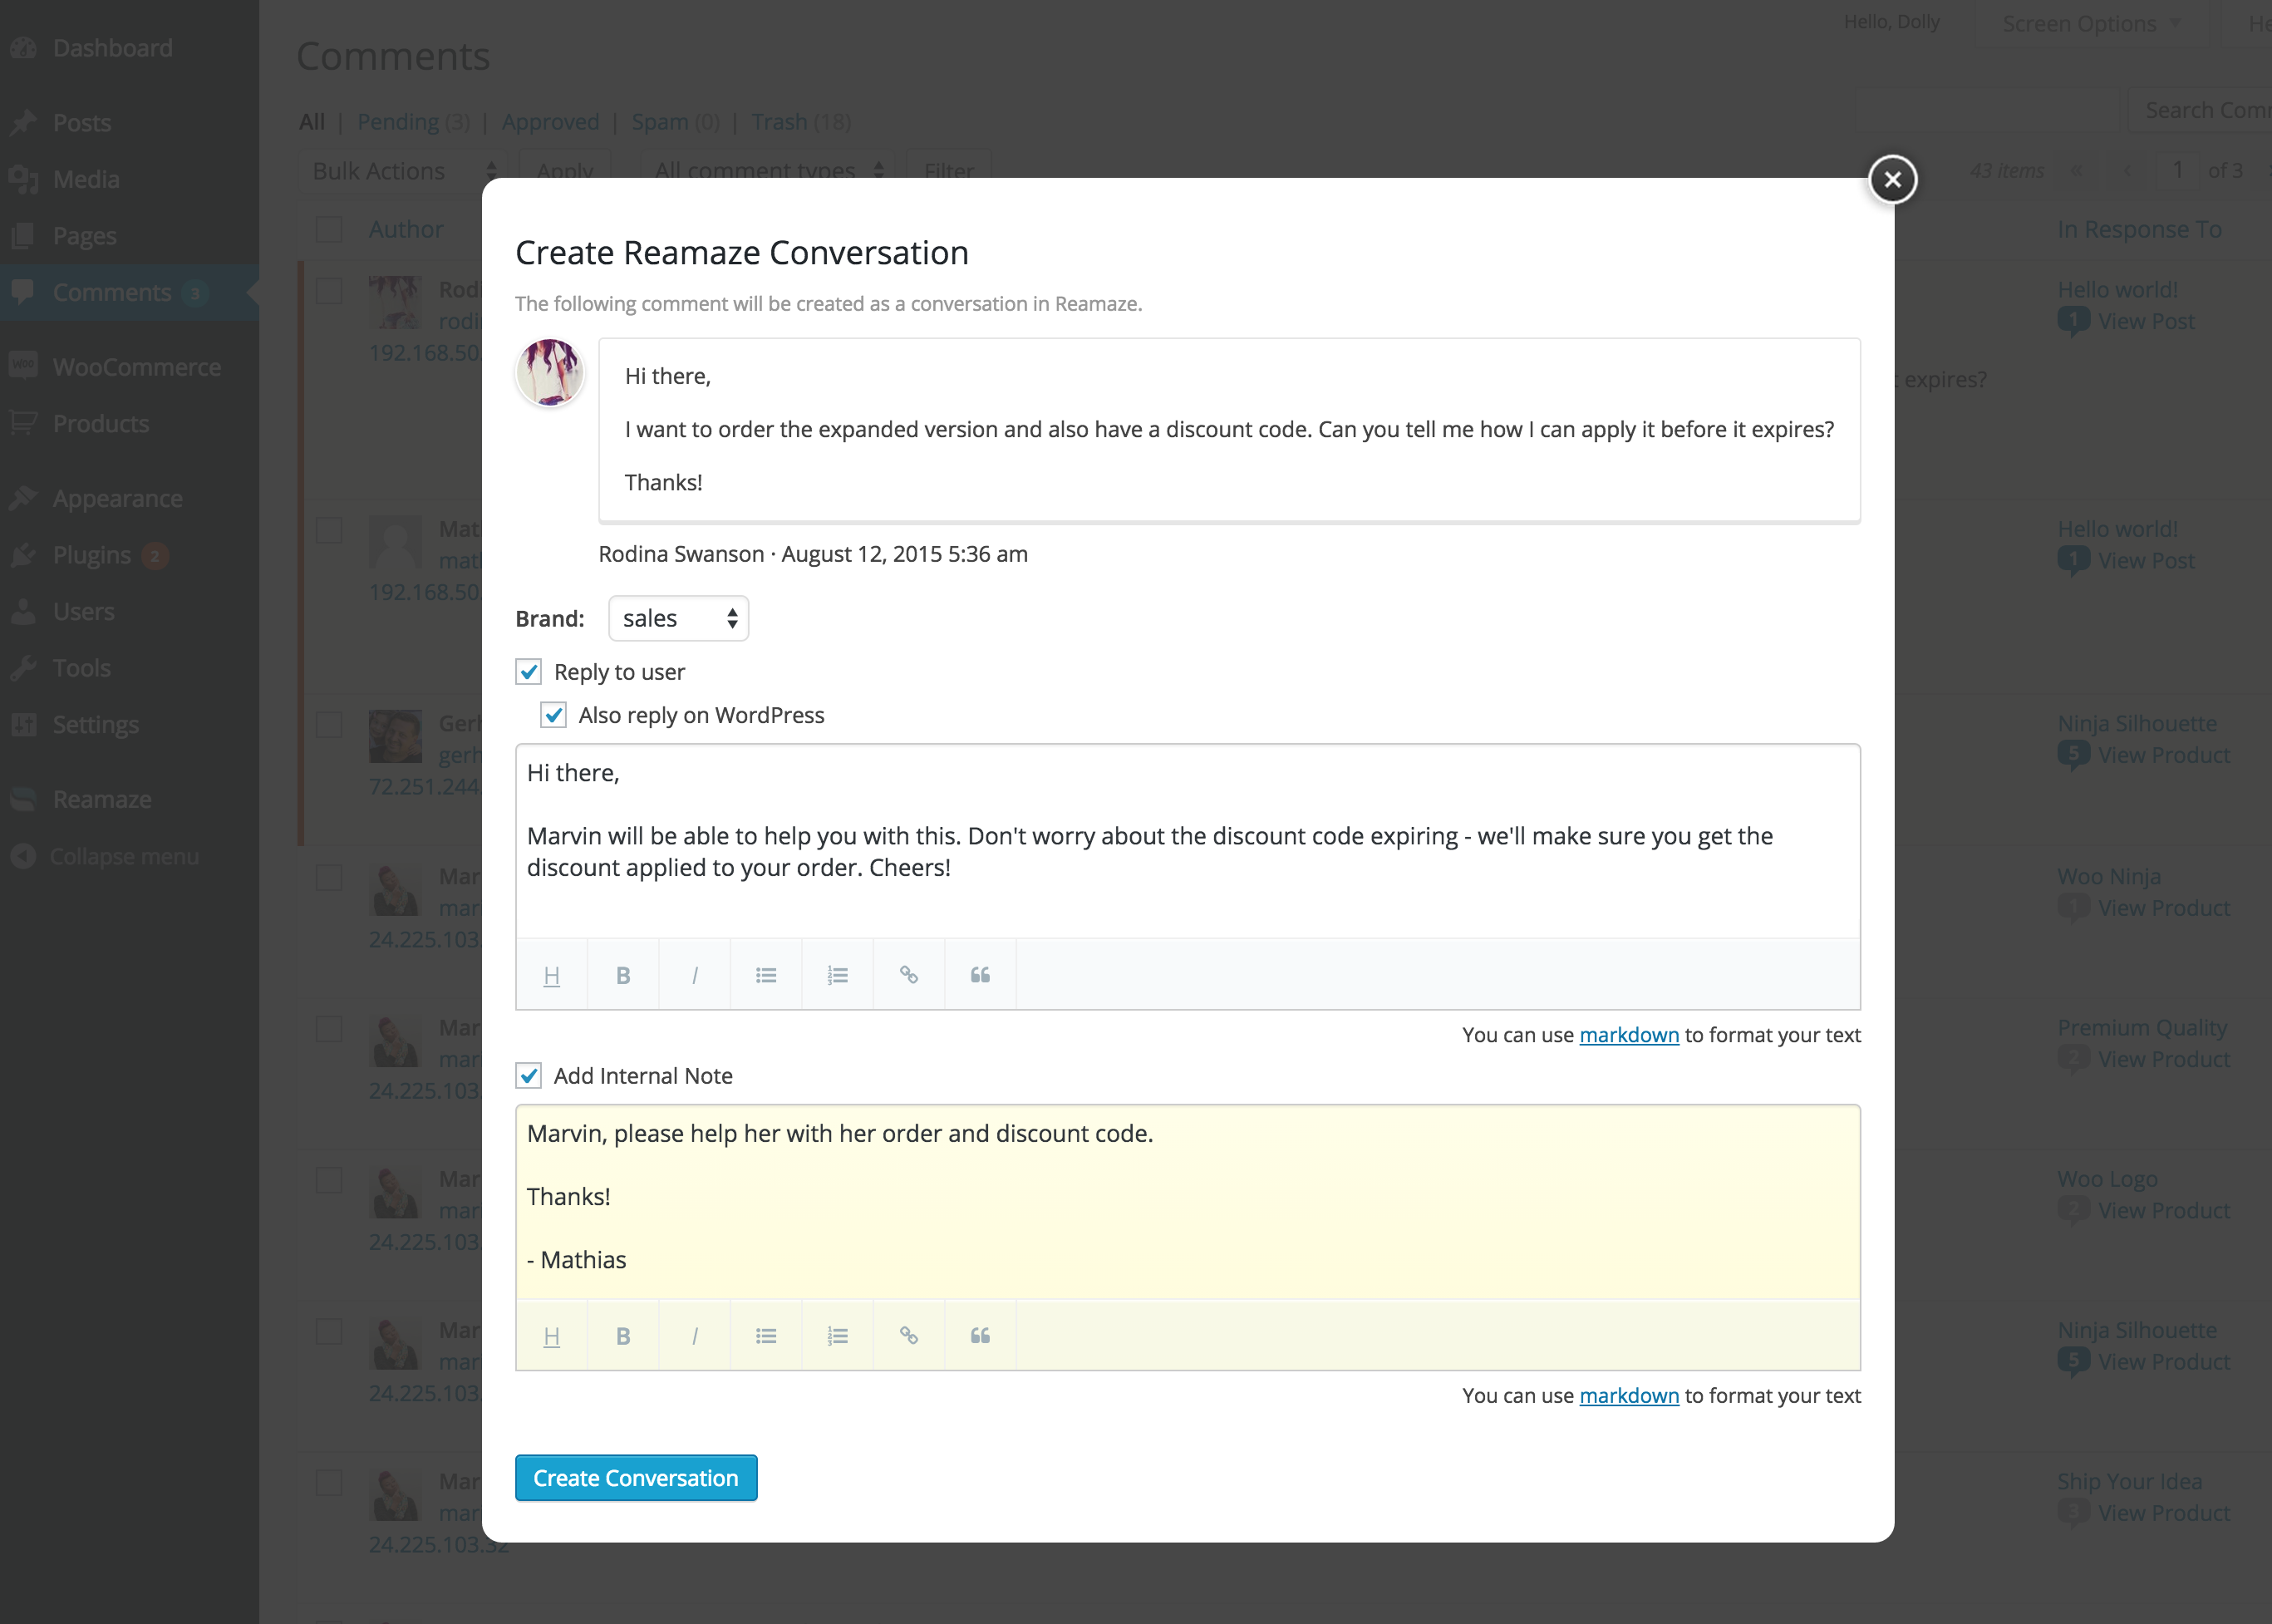 Convert a comment to a conversation. Add Internal Notes so your support staff knows what's up.